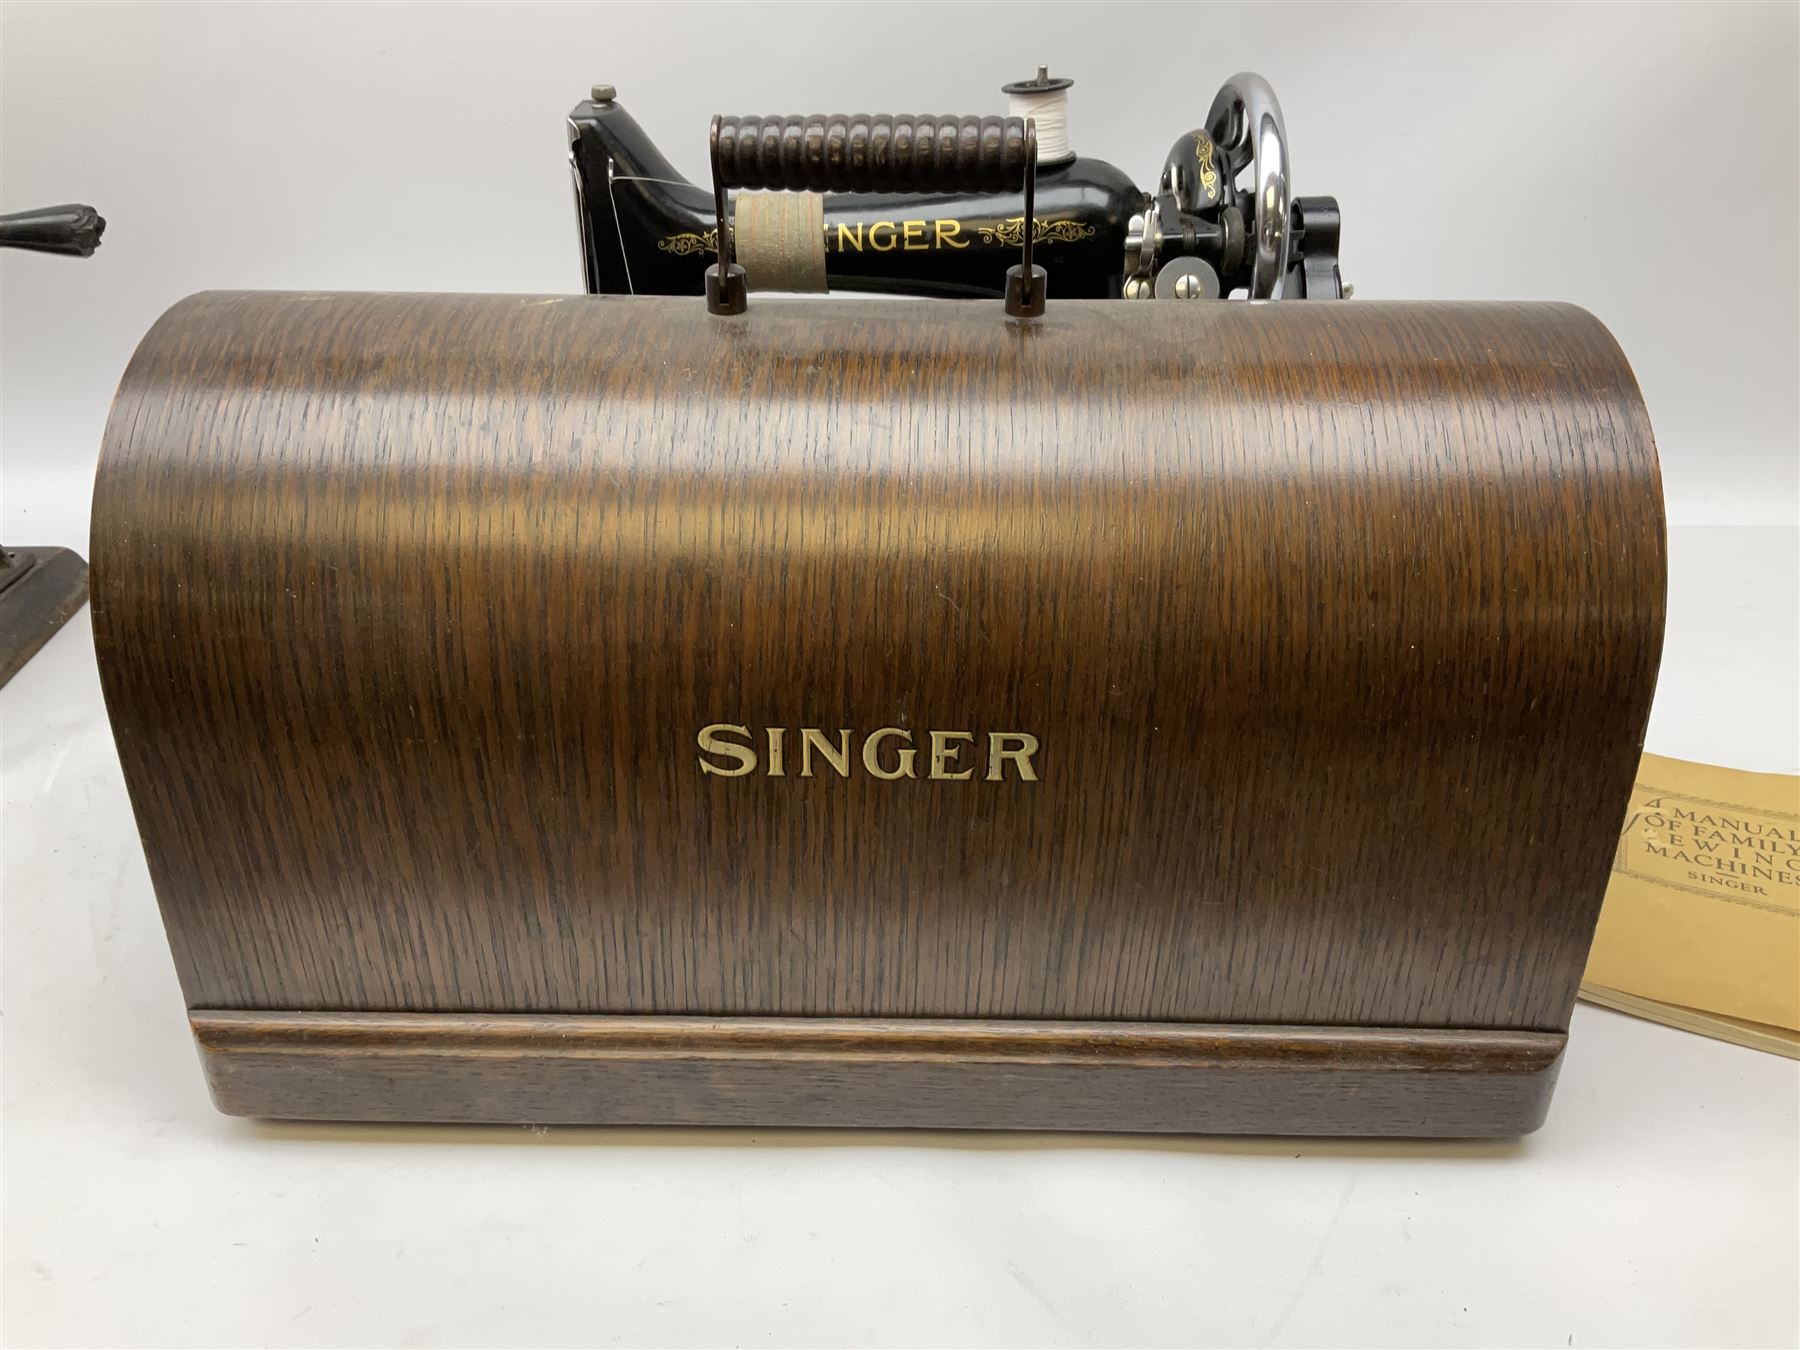 Singer sewing machine no. EA584046 in case (missing key) and Singer Manual of Family Sewing Machines - Image 9 of 10